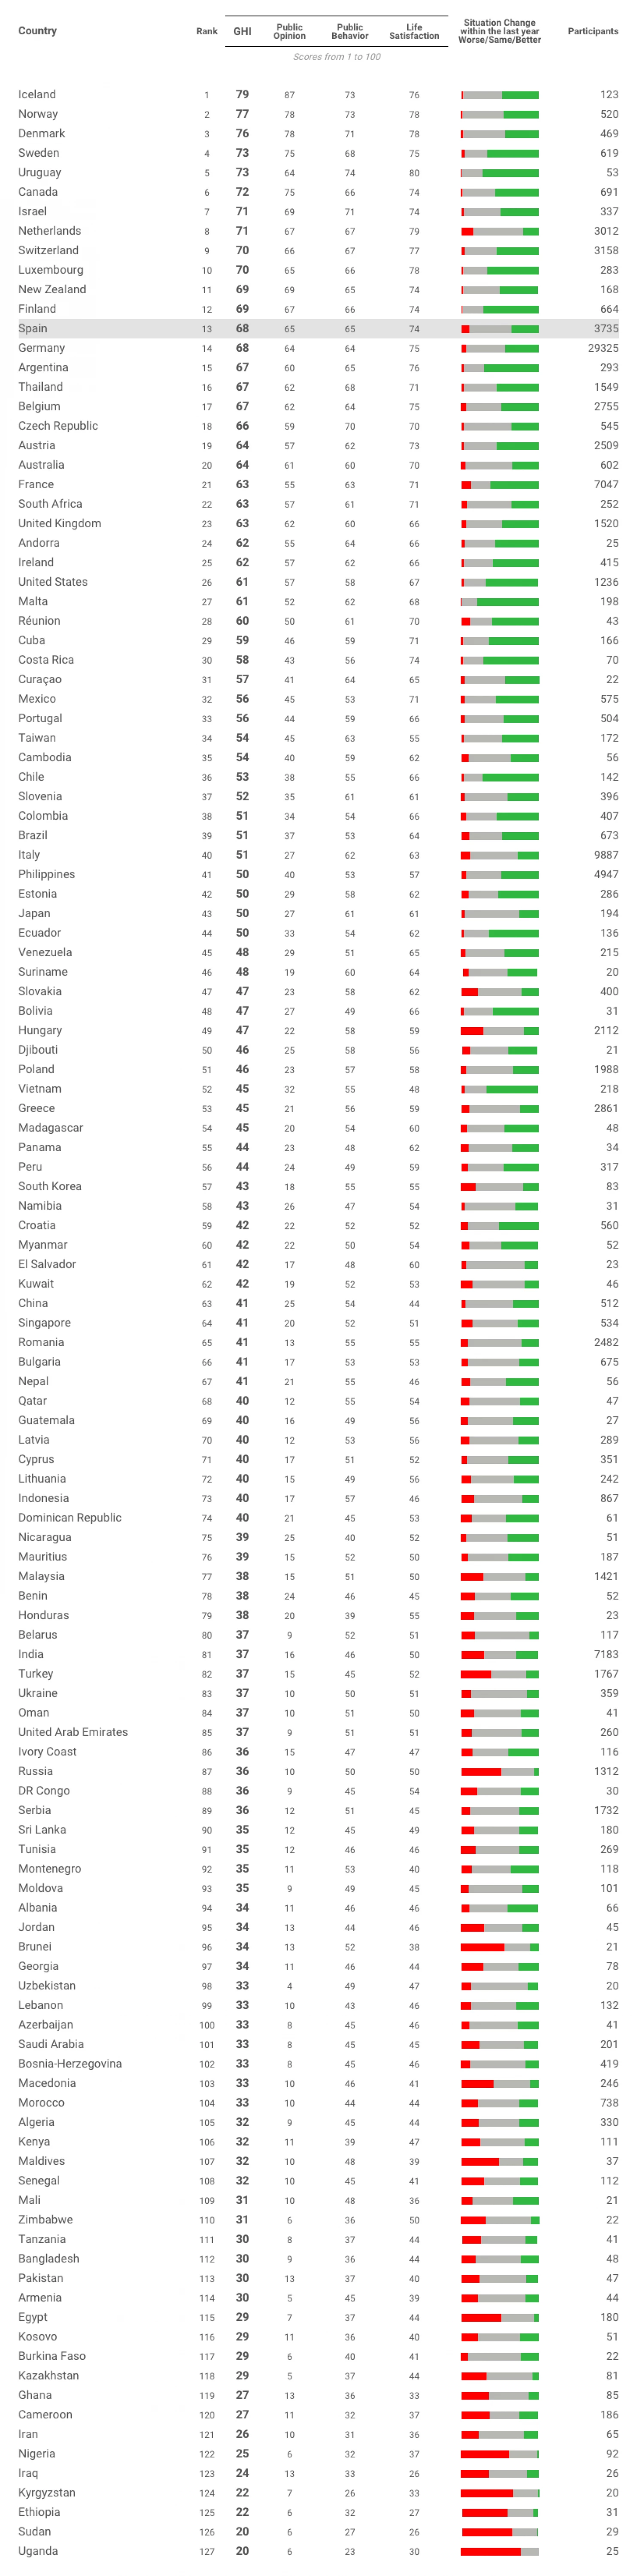 PH Ranks 41 Out of 127 in List of Countries Where Gay Men are Happiest